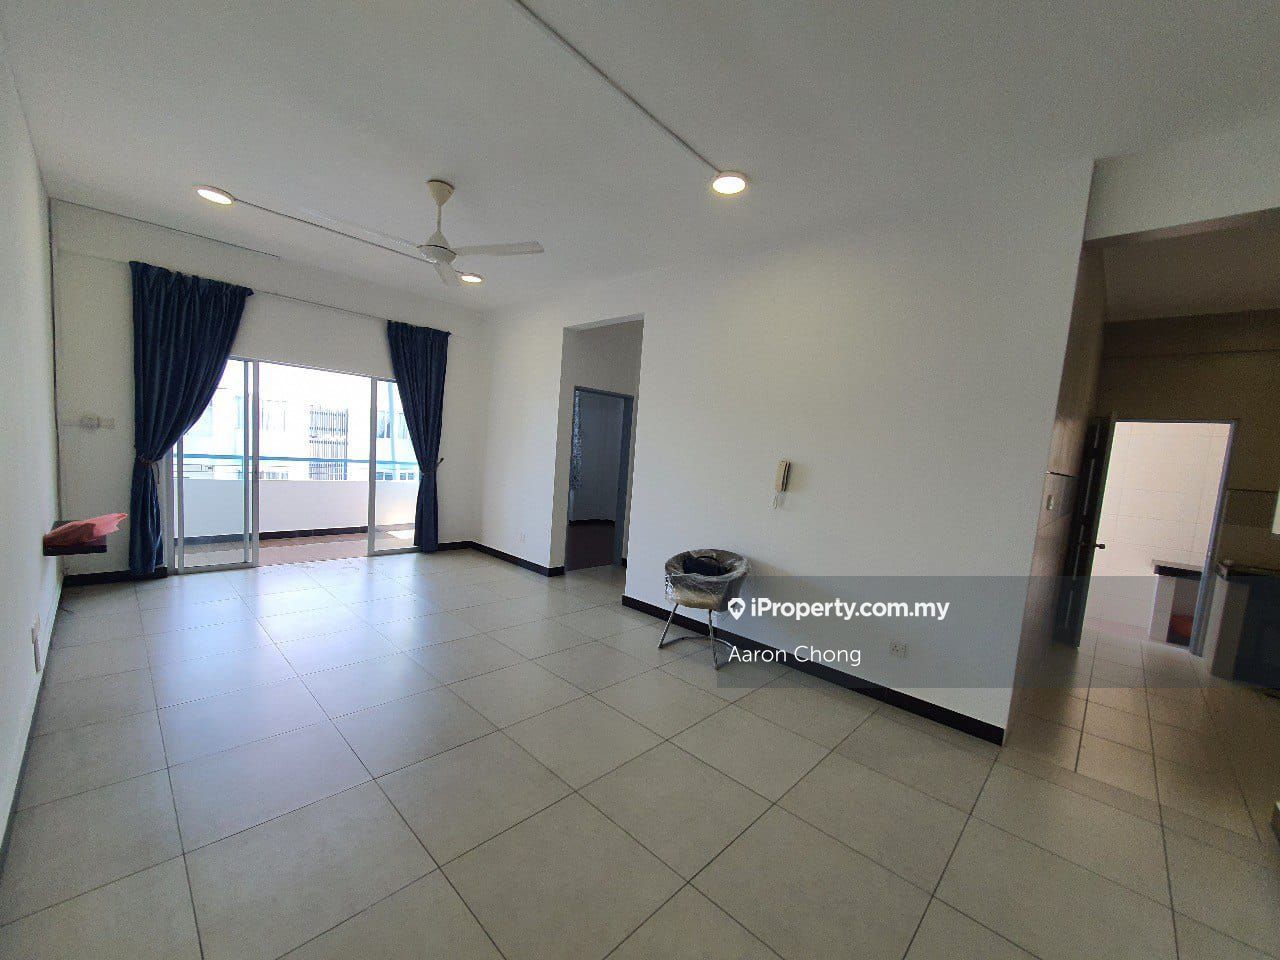 Delta Heights Apartment 2+1 bedrooms for rent in Penampang, Sabah ...